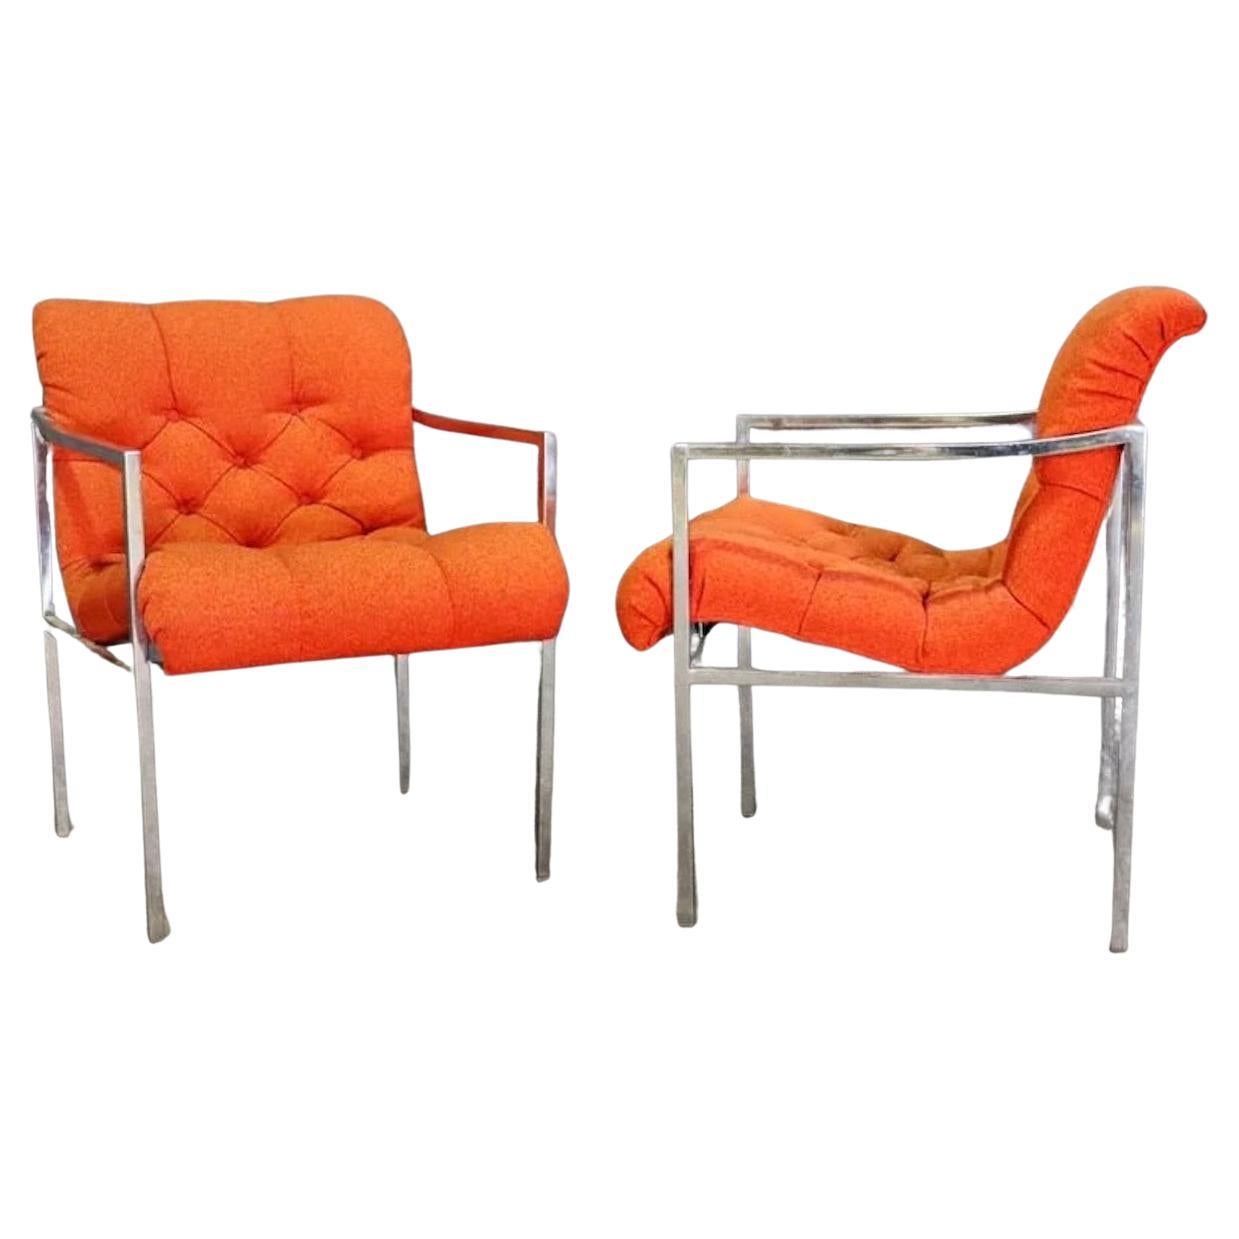 Stow Davis Mid-Century Scoop Chairs For Sale